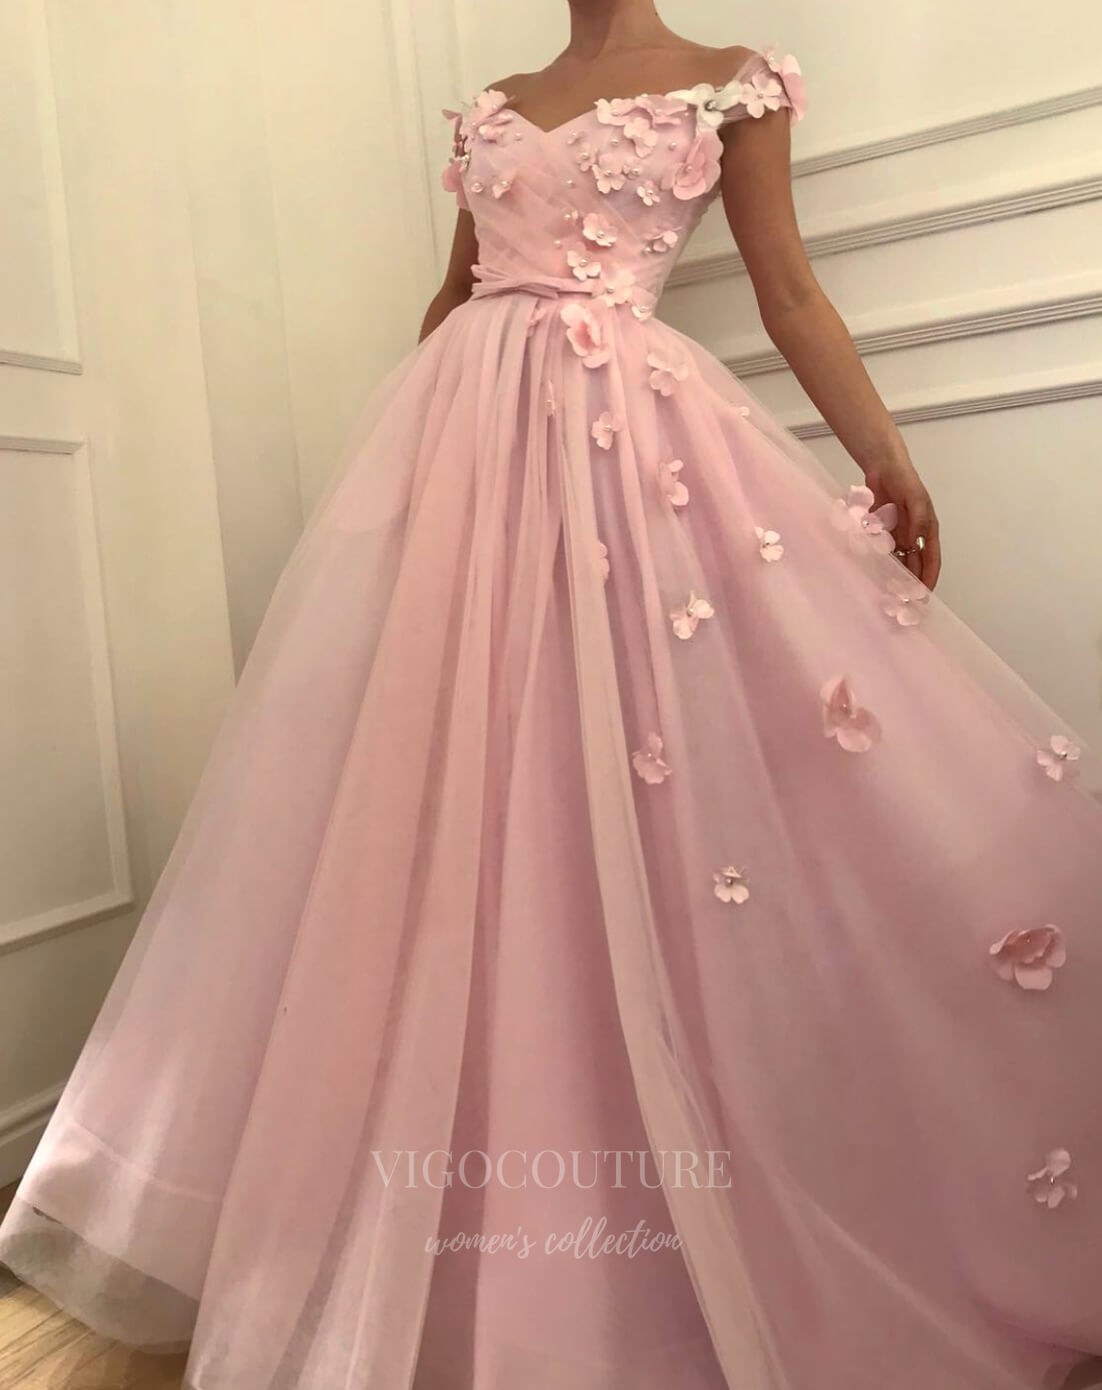 vigocouture-Pink Floral Off the Shoulder Tulle Prom Dress 20994-Prom Dresses-vigocouture-Pink-US2-